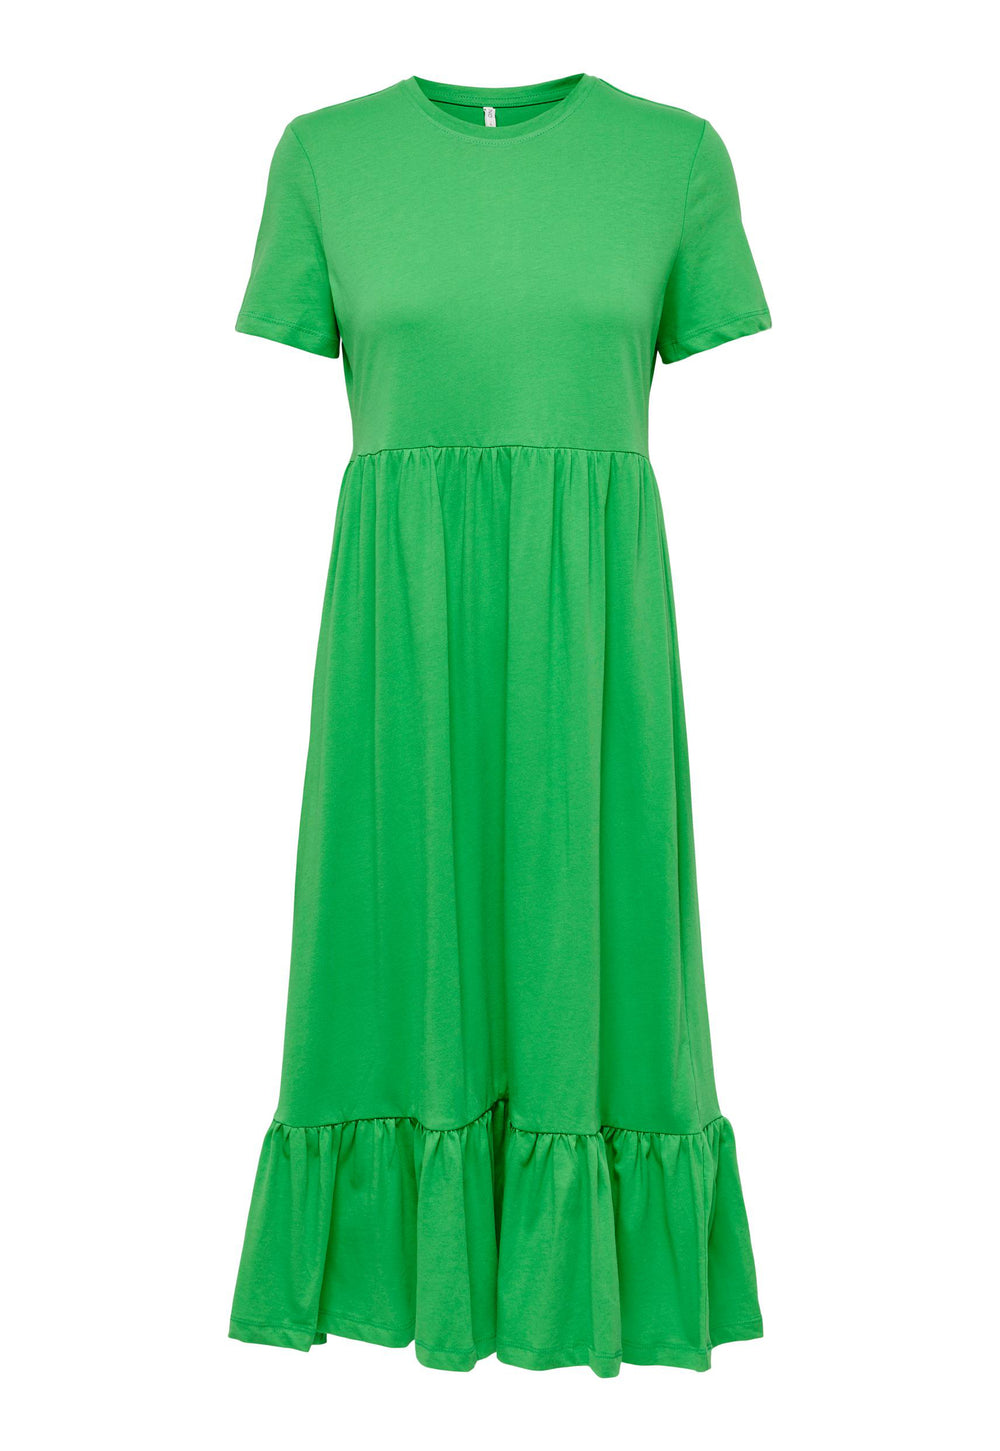 ONLY May Tiered Jersey Midi Summer Dress in Bright Green - One Nation Clothing